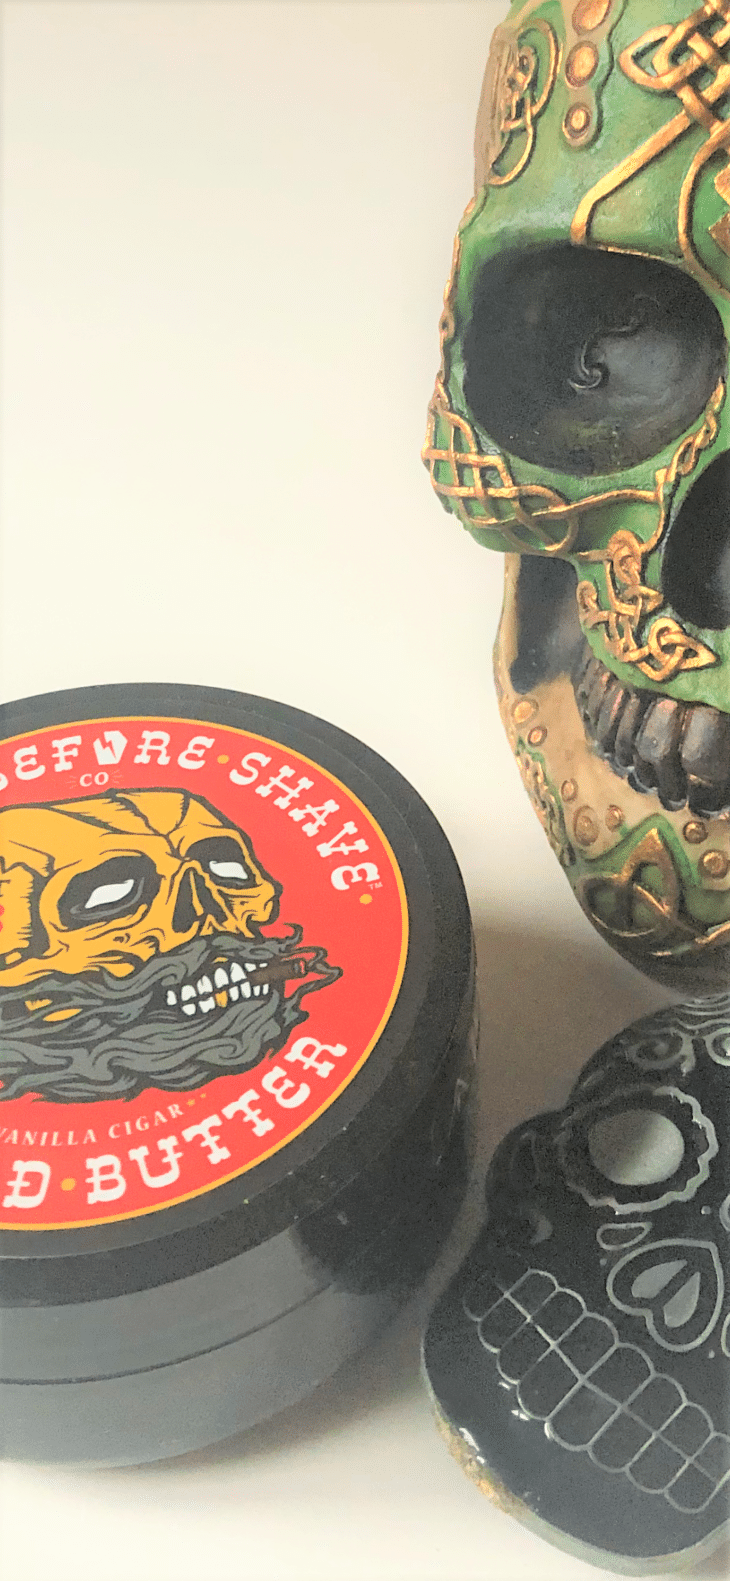 Beard Butter with the Best Artwork & Branding - Grave Before Shave